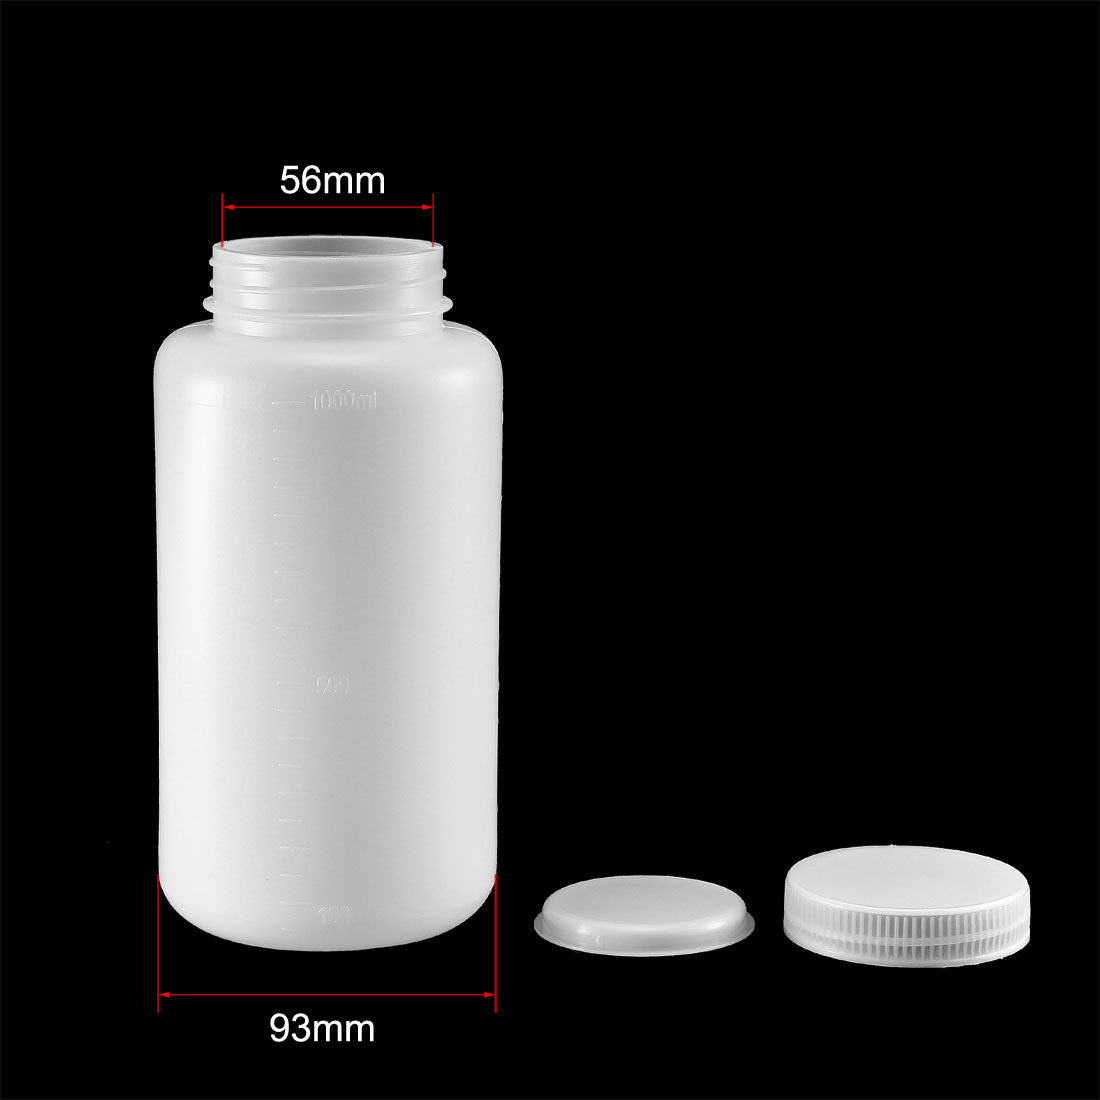 uxcell Uxcell Plastic Lab Chemical Reagent Bottle 1000ml/34oz Wide Mouth Sample Sealing Liquid Storage Container 2pcs